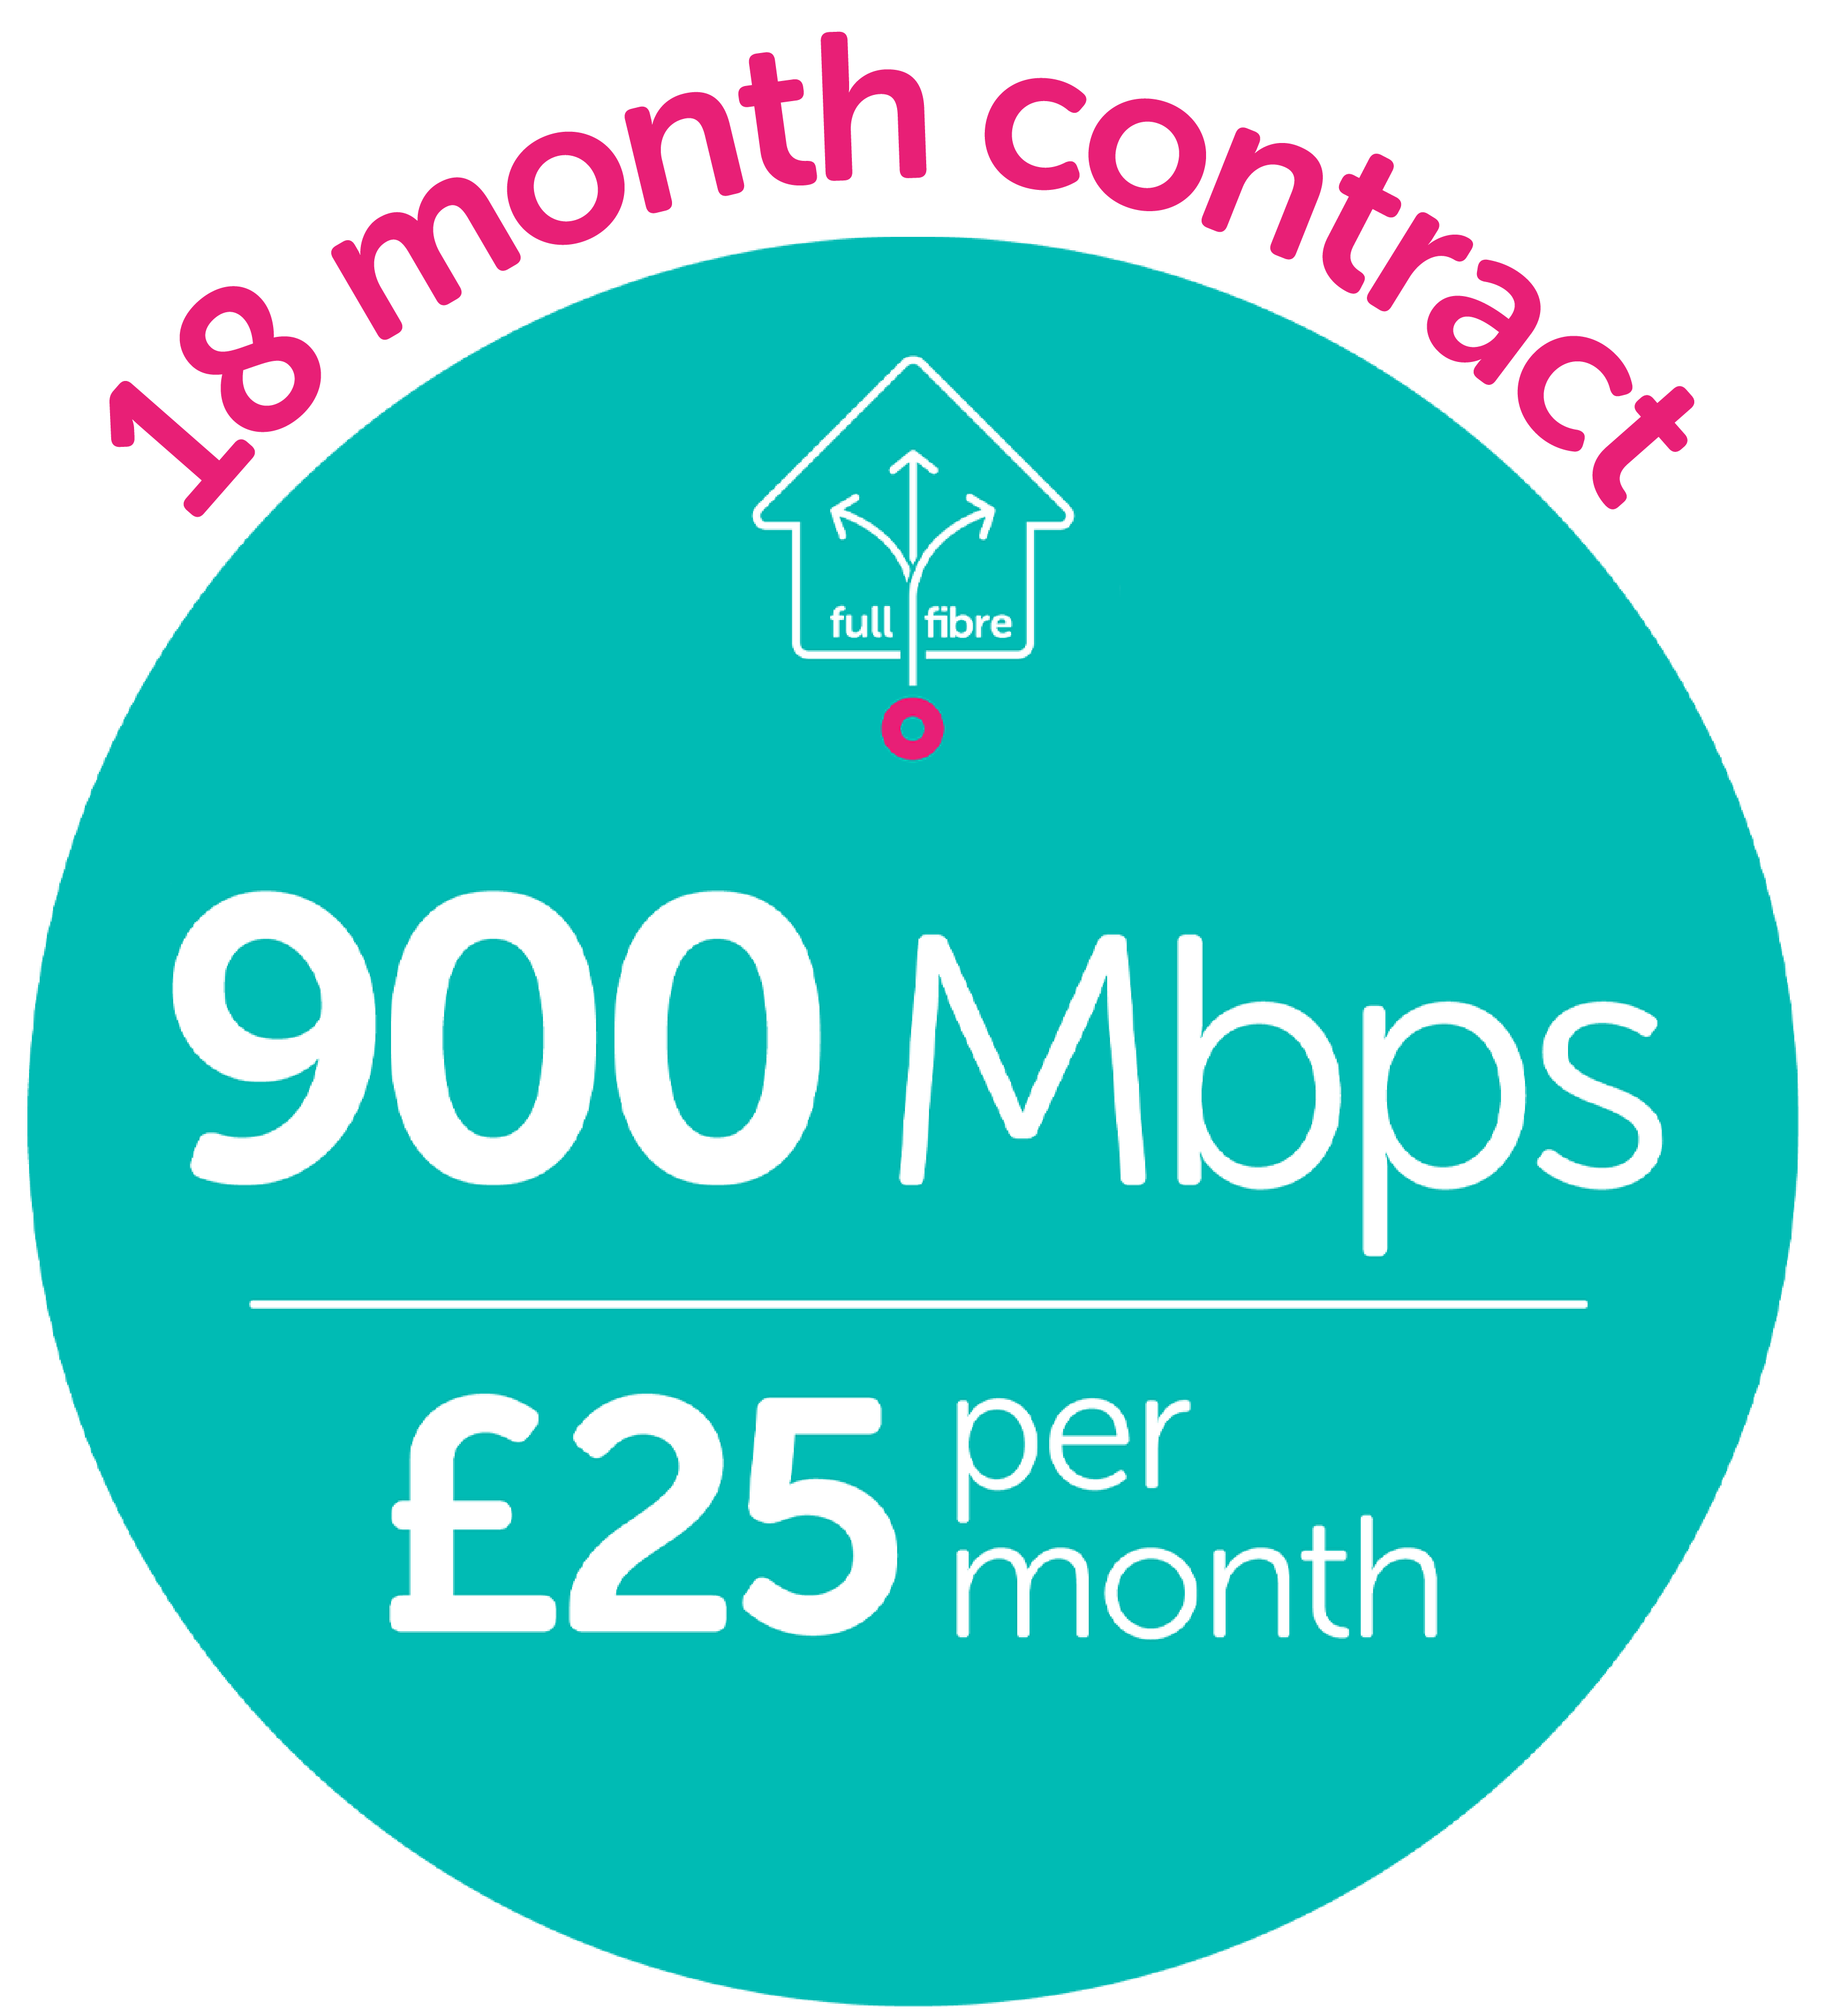 £25 a month on an 18 month contract | toob full-fibre broadband